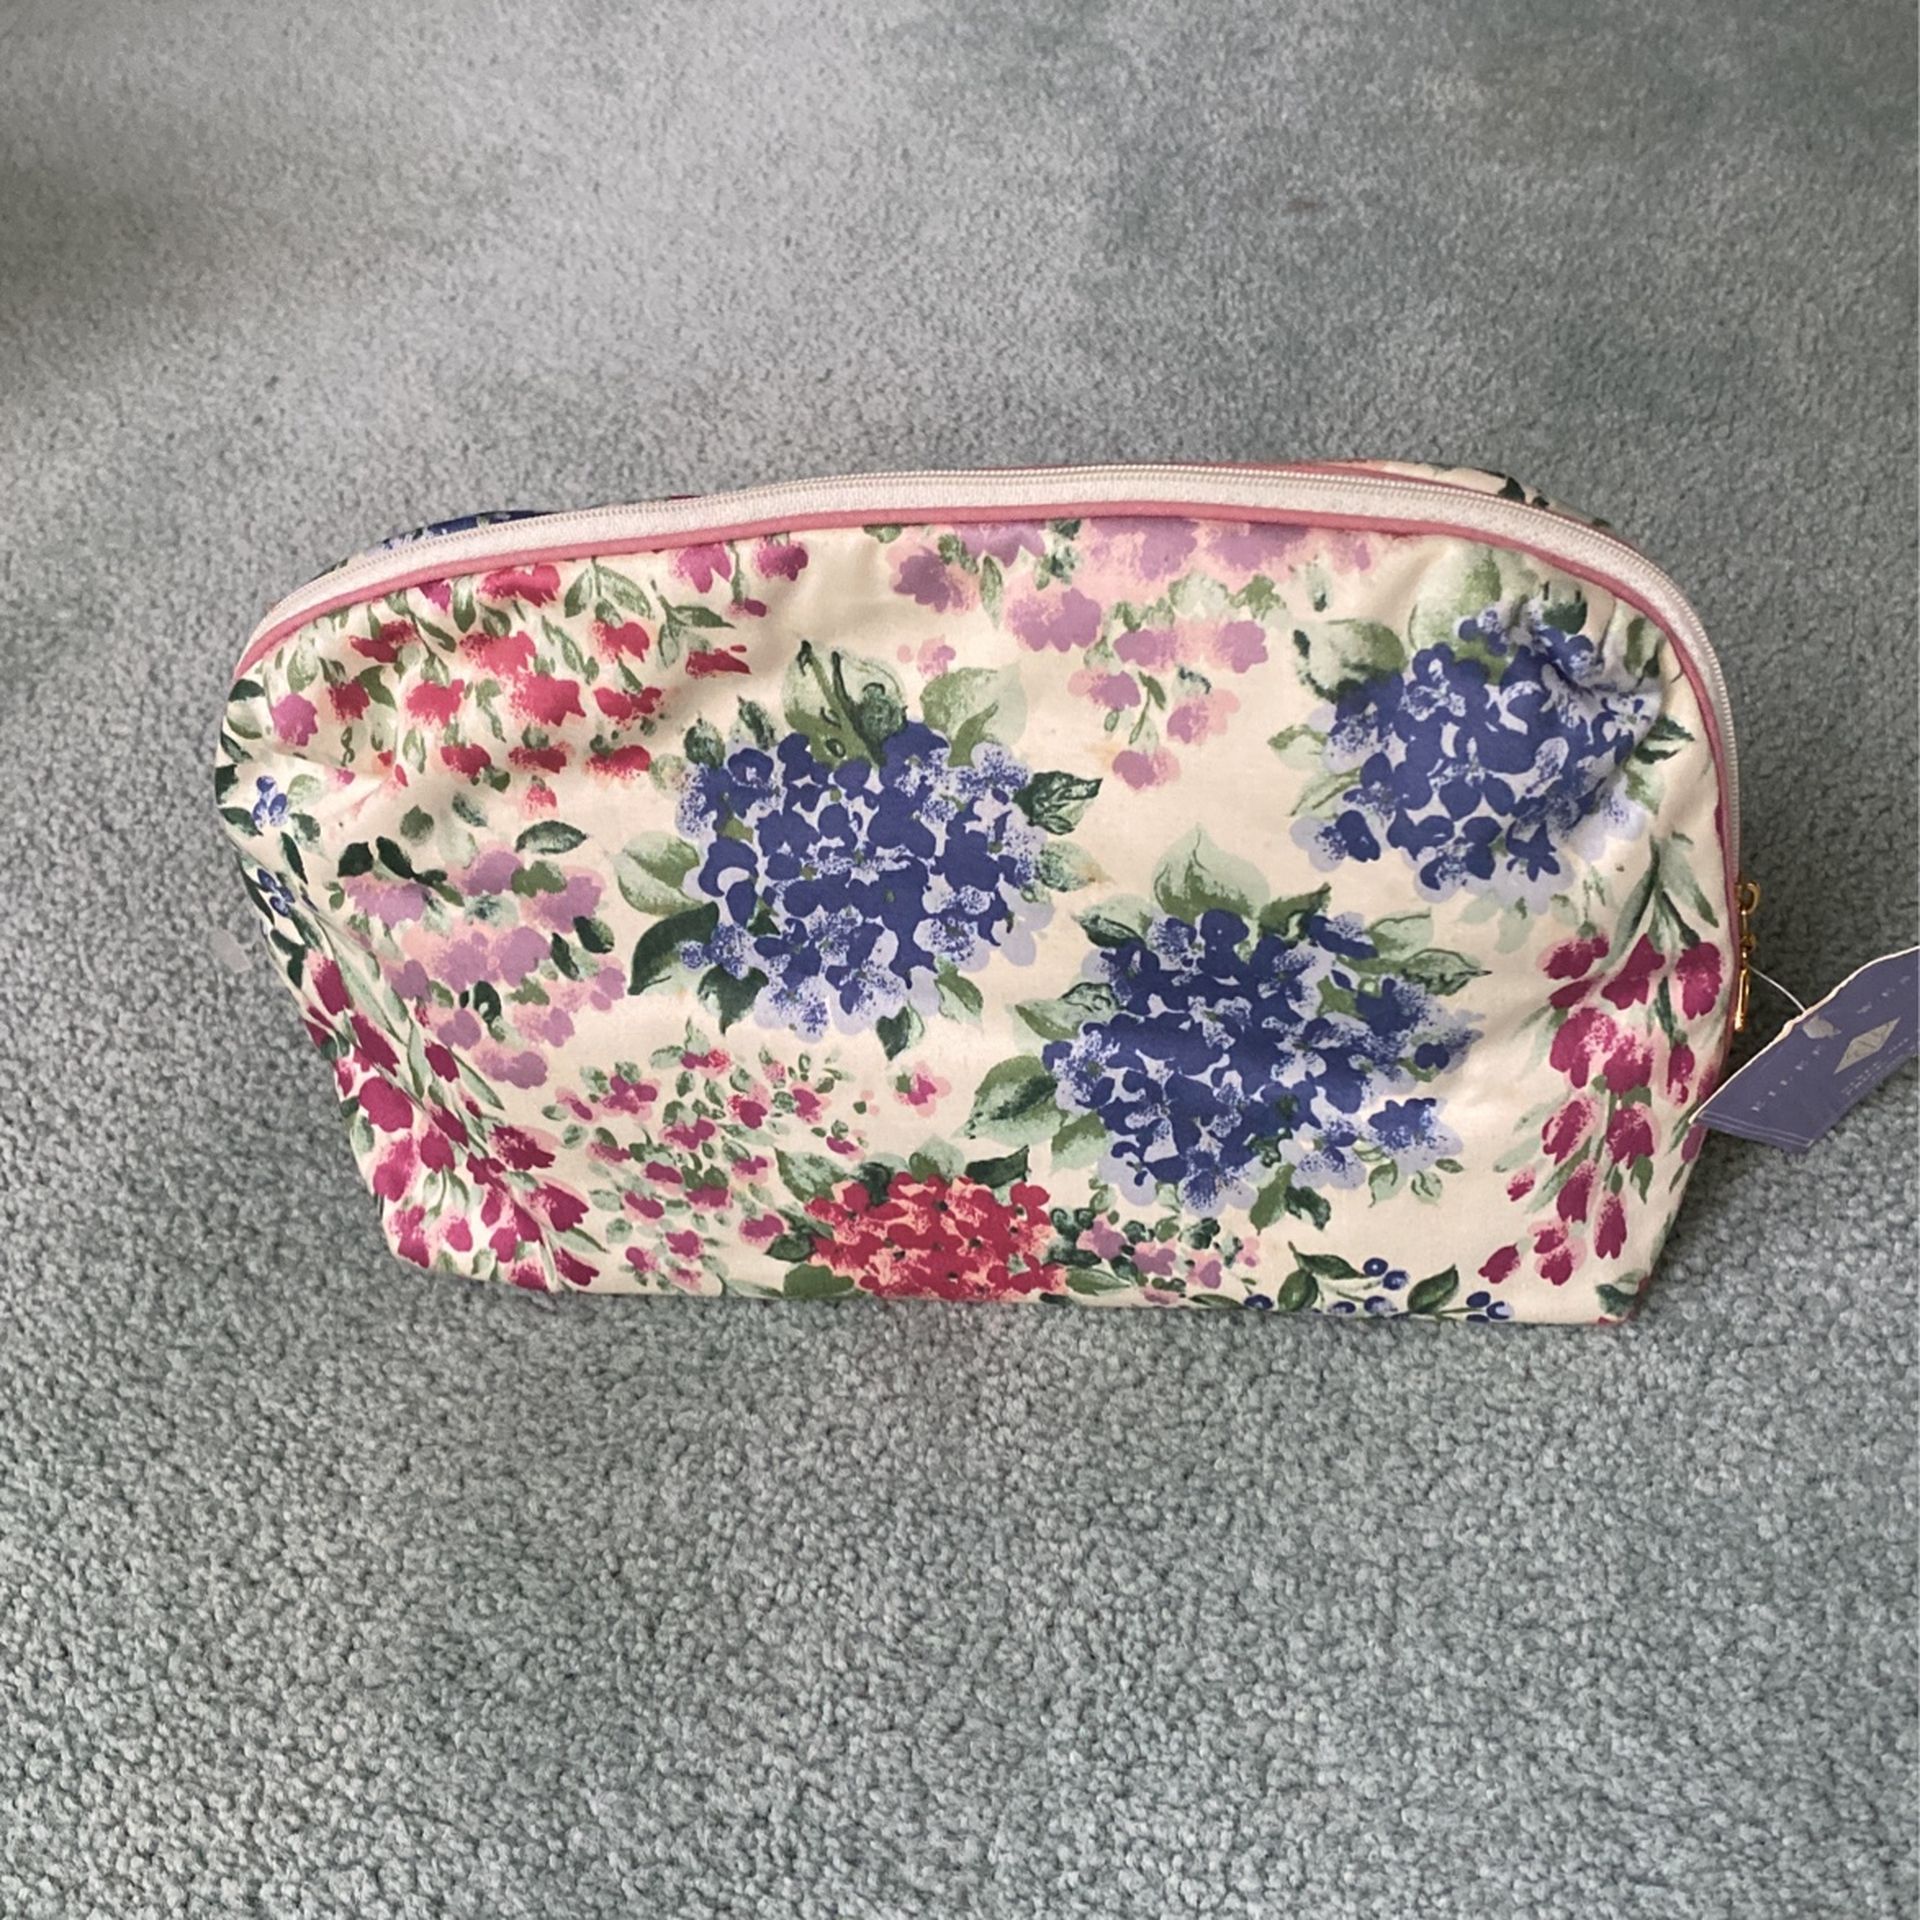 Makeup Bag By Eileen West